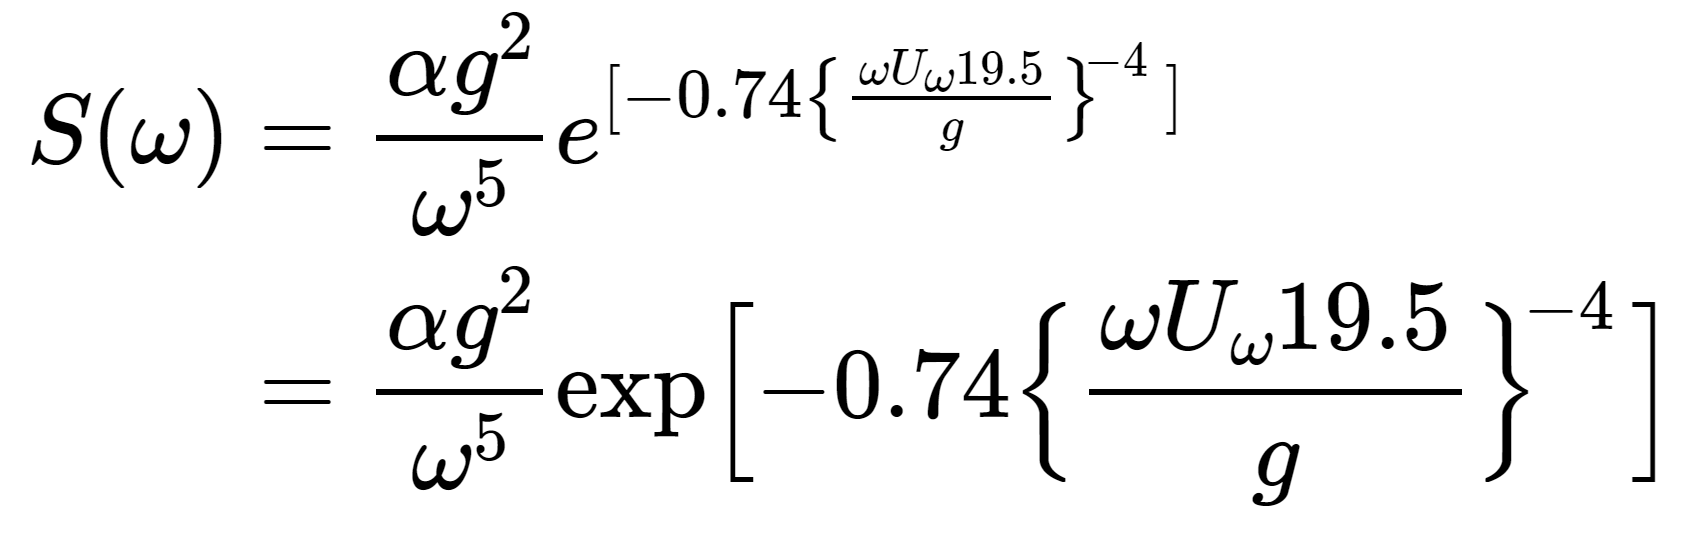 A rendered LaTeX equation.